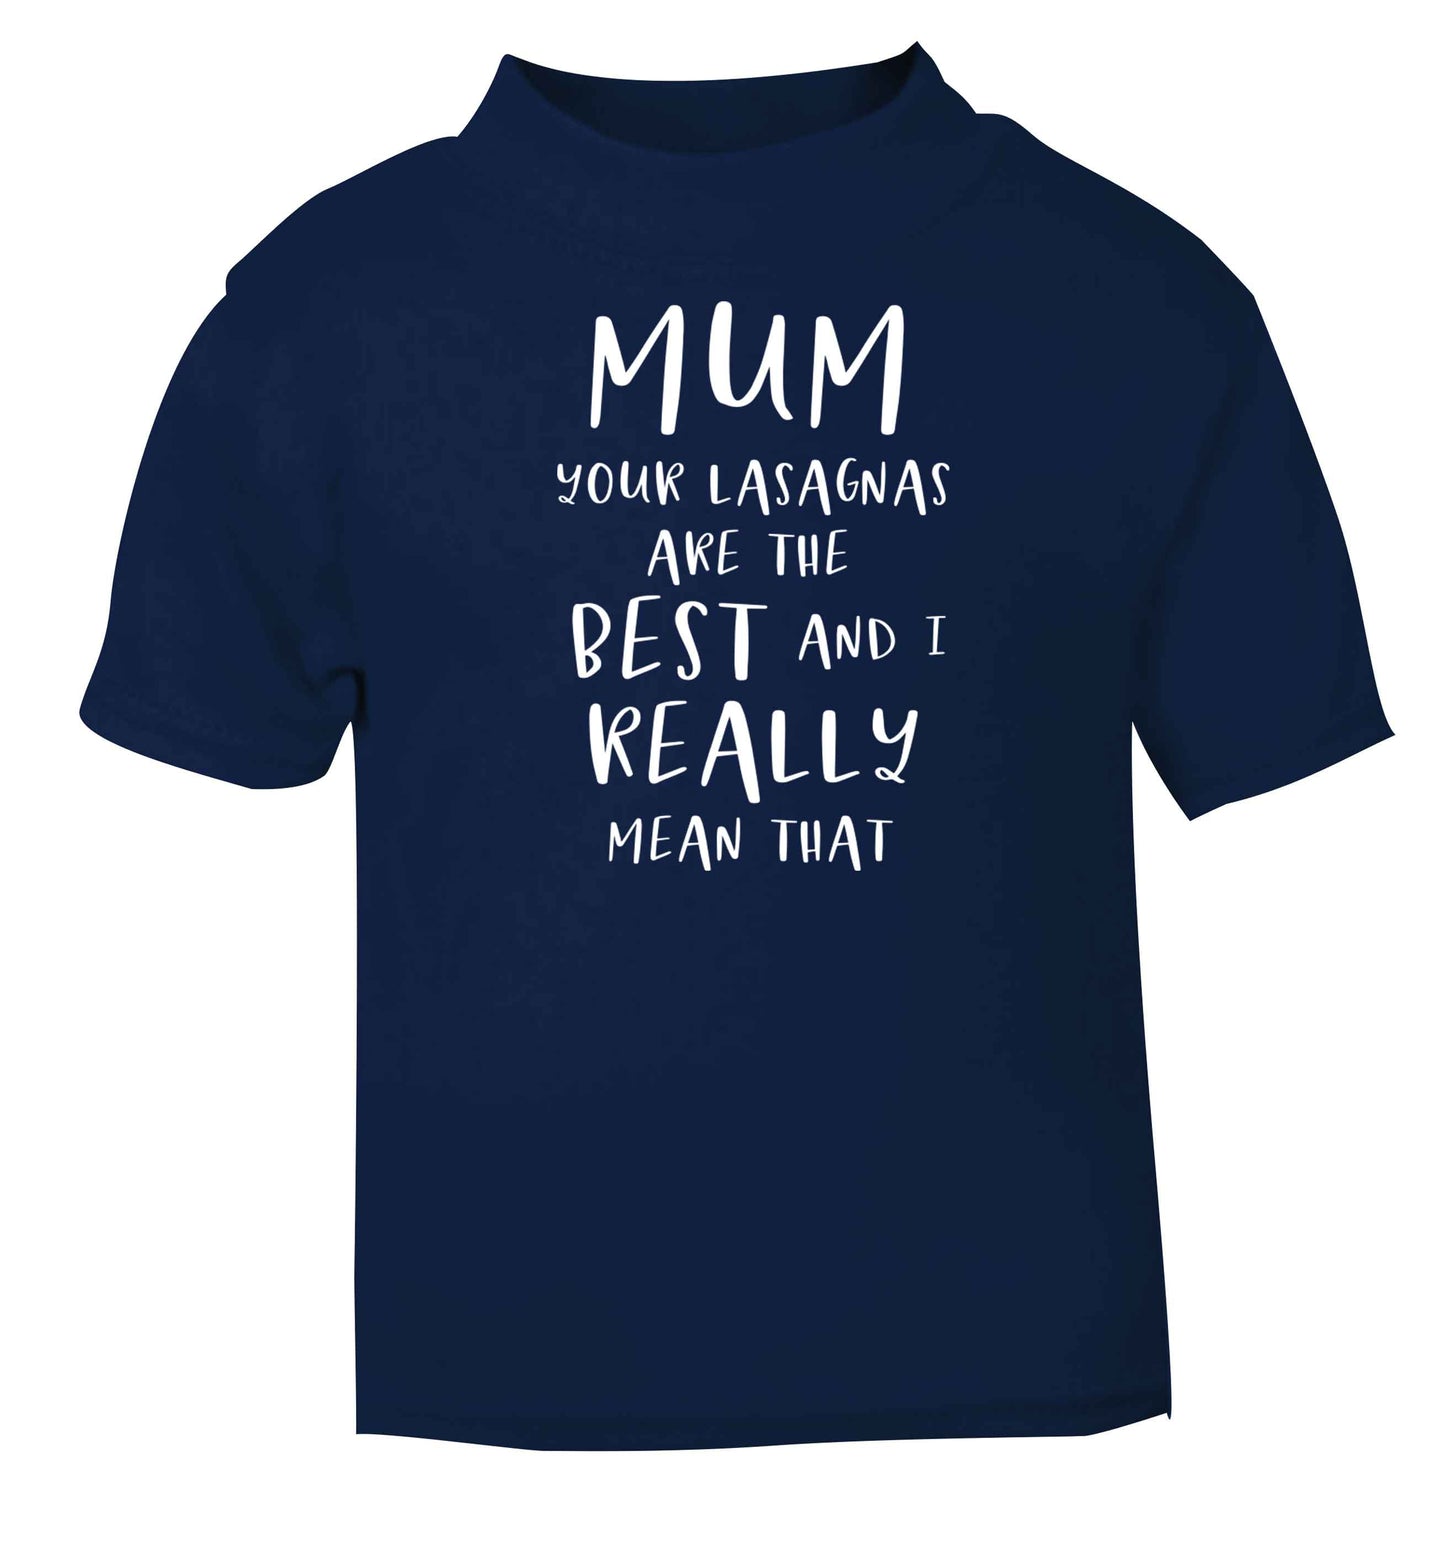 Funny gifts for your mum on mother's dayor her birthday! Mum your lasagnas are the best and I really mean that navy baby toddler Tshirt 2 Years